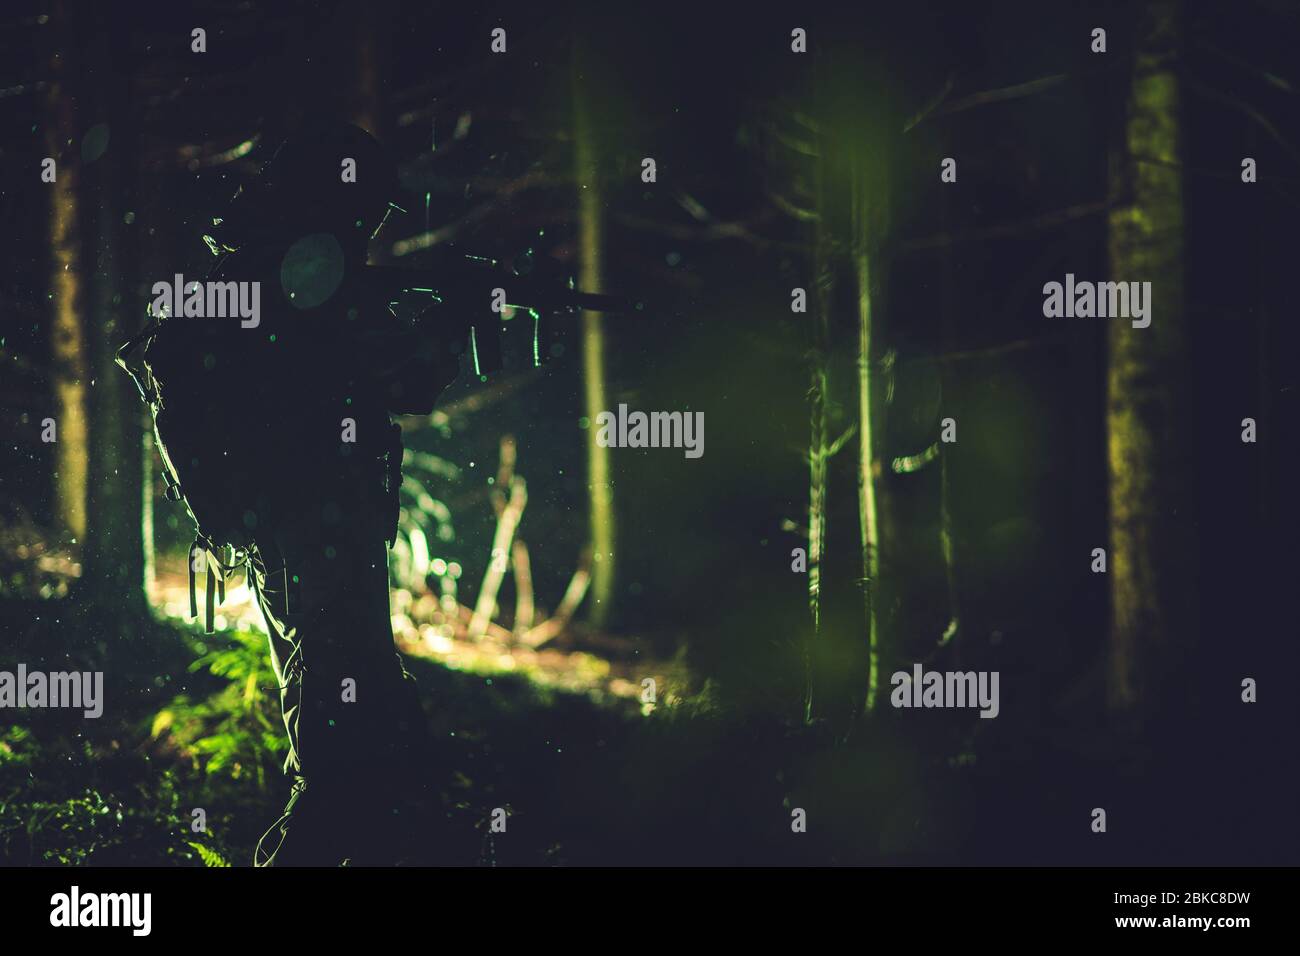 Soldier with Assault Rifle in Action in Dark Rainy Forest. Army and Military Theme. Stock Photo